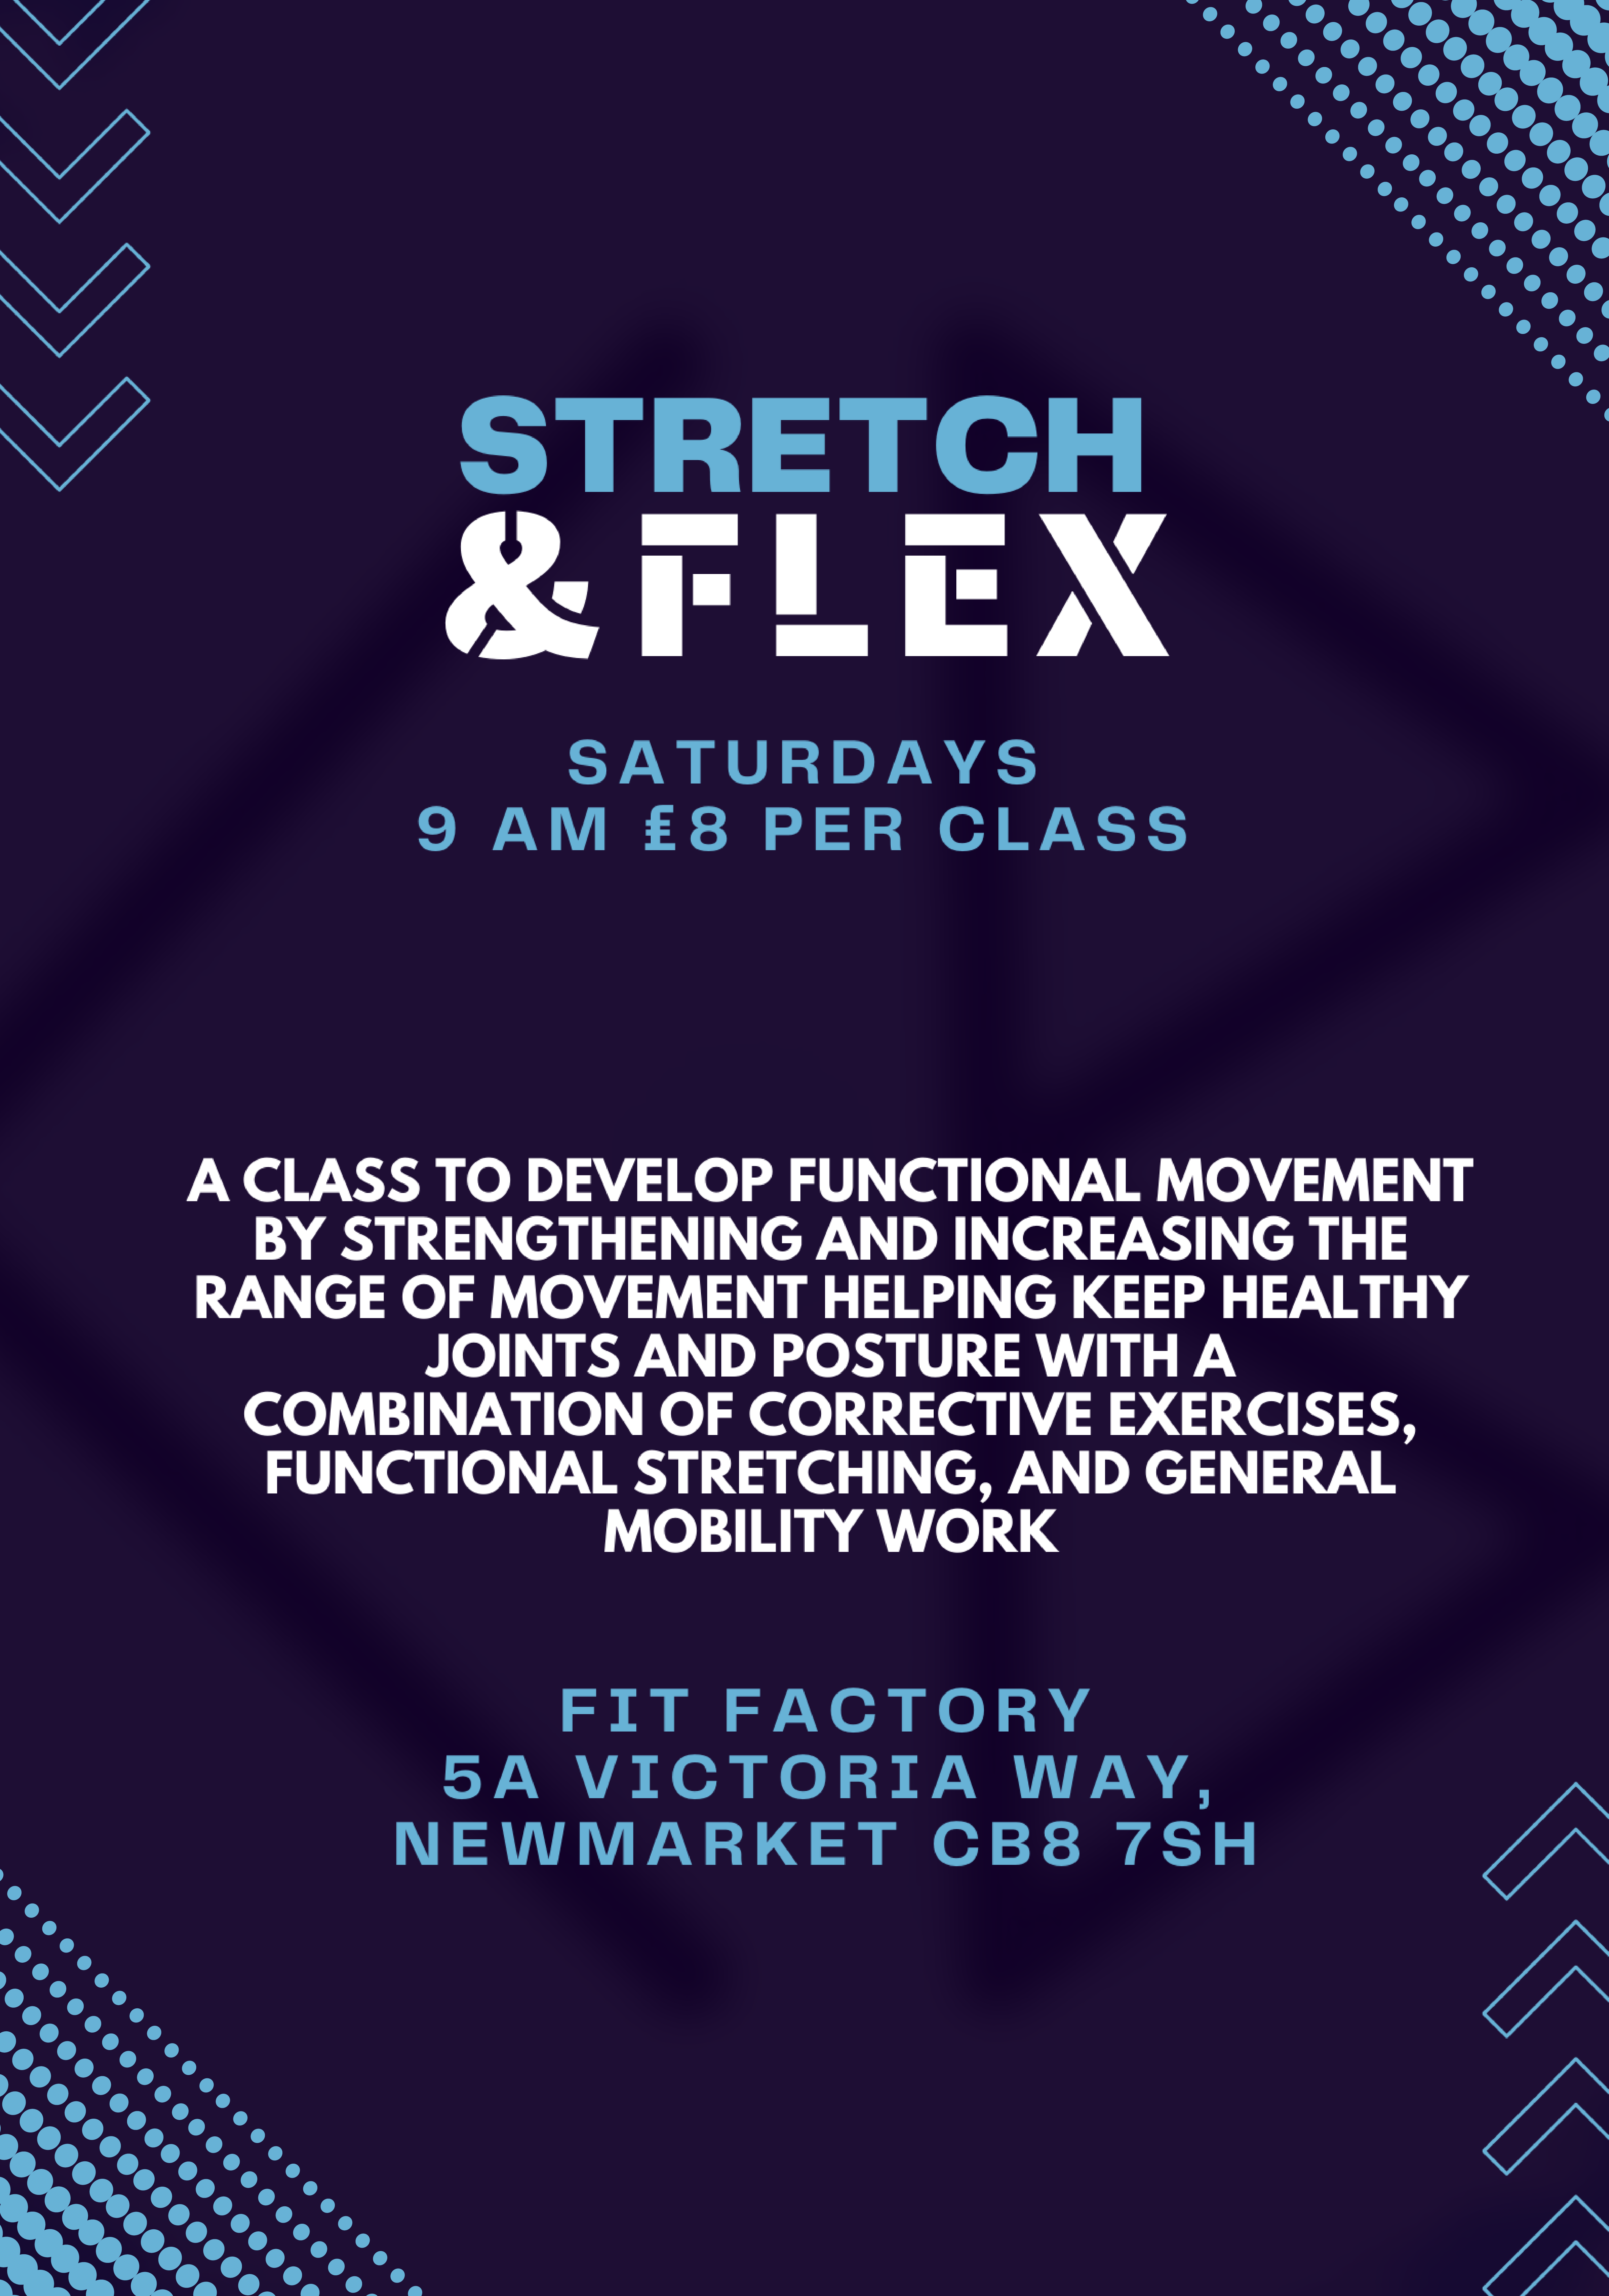 Stretch and Flex classes poster, saturdays 9am - 10am, £8 per class. a class to develop functional movement by strengthening and increasing the range of movement helping keep healthy joints and posture with a
Combination of corrective exercises,  functional stretching, and general Mobility work. fit factory
5a Victoria Way, Newmarket CB8 7SH